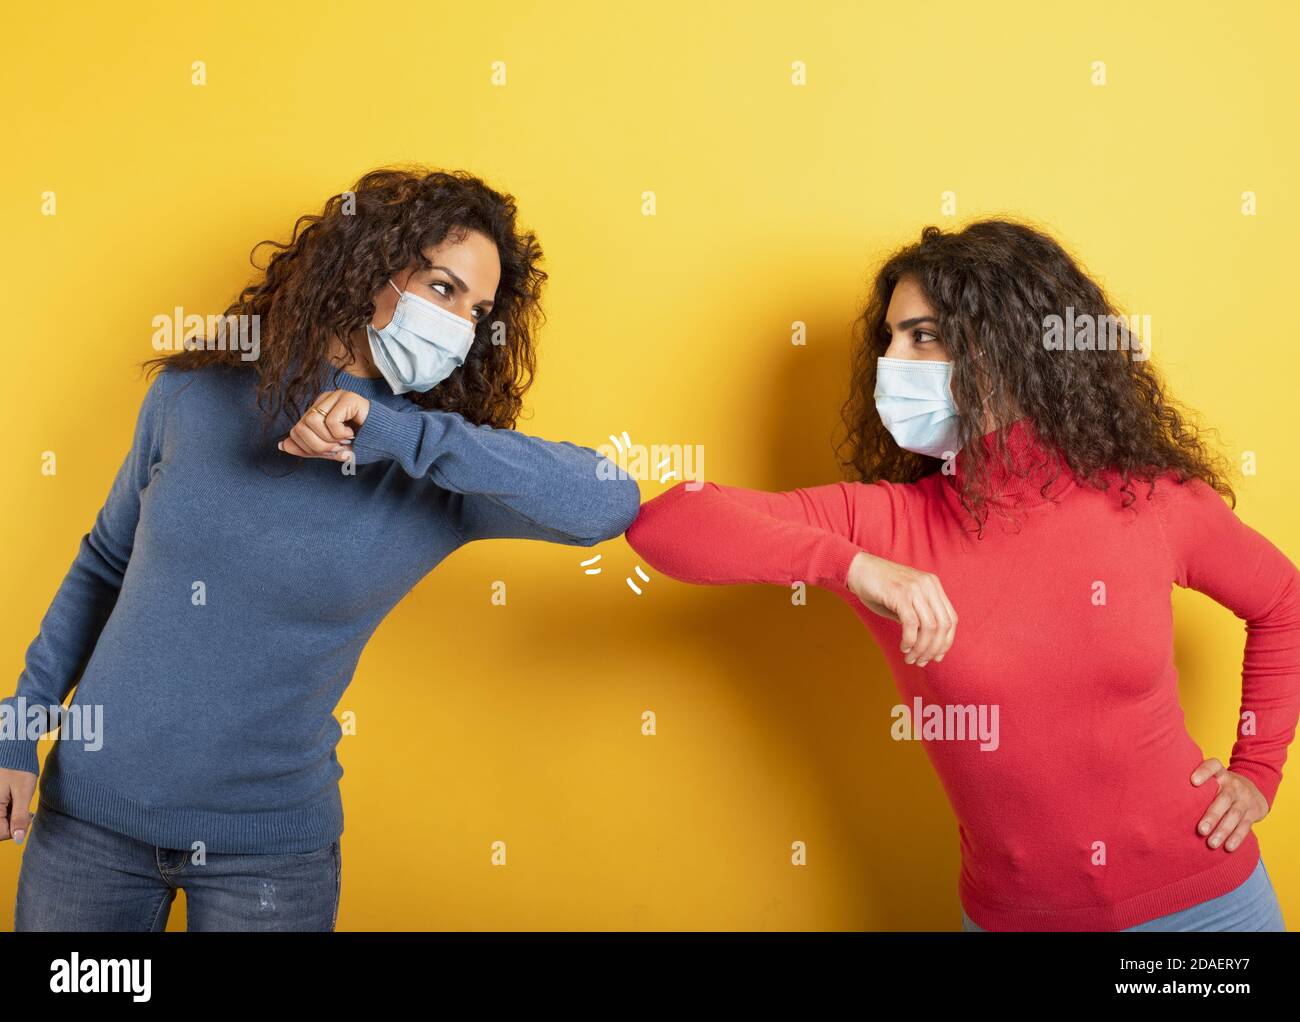 Friends greet each other while keeping their distance. Concept of codiv-19 rules to avoid pandemic. yellow background Stock Photo